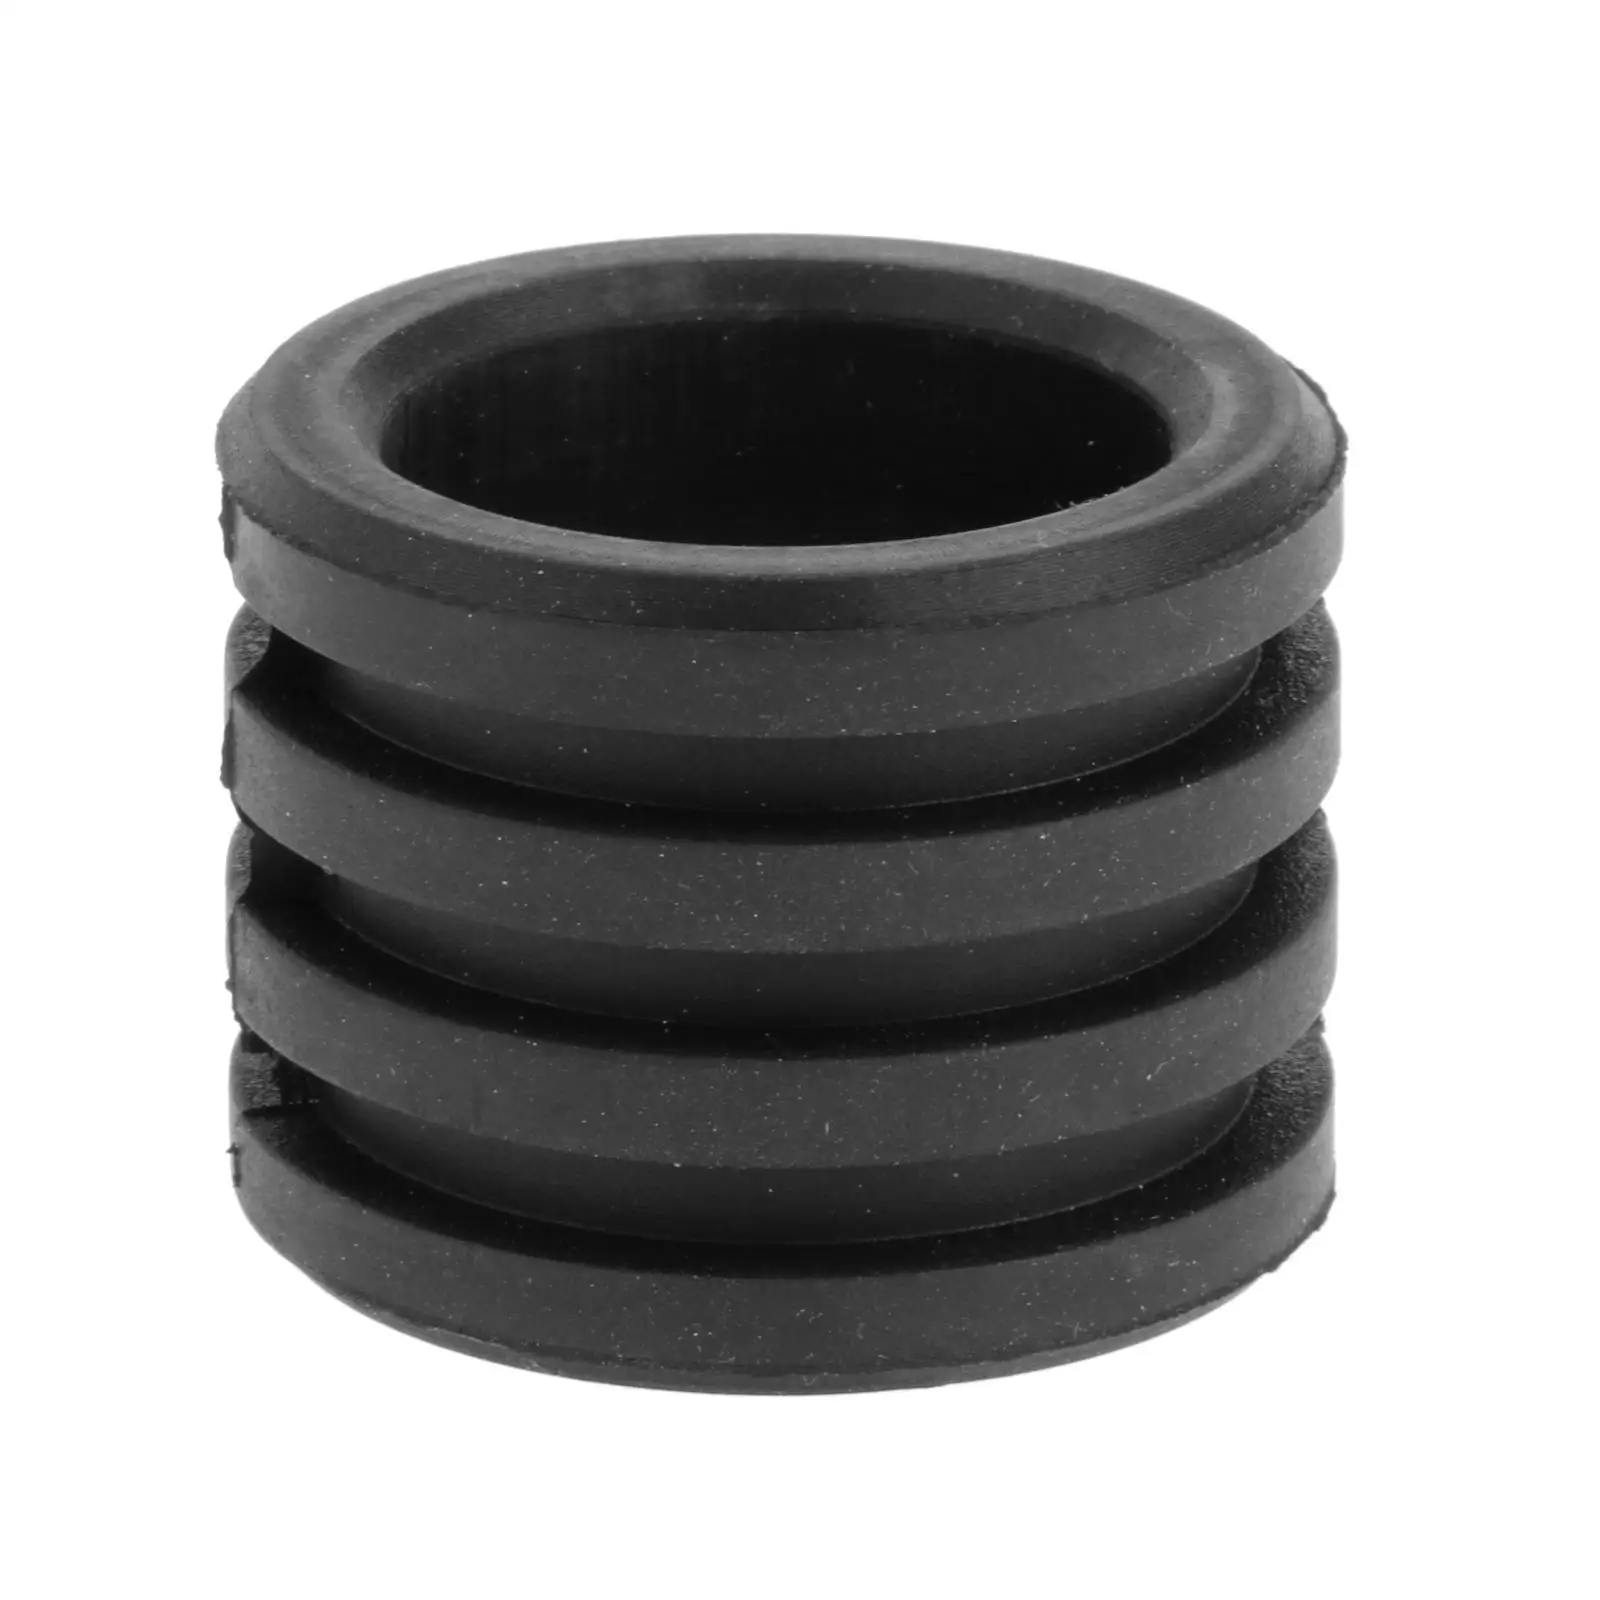 Exhaust Gasket Rubber Flange for  1984-07 CR250R CR 250 18365-KA4-730 ,Easy to Install